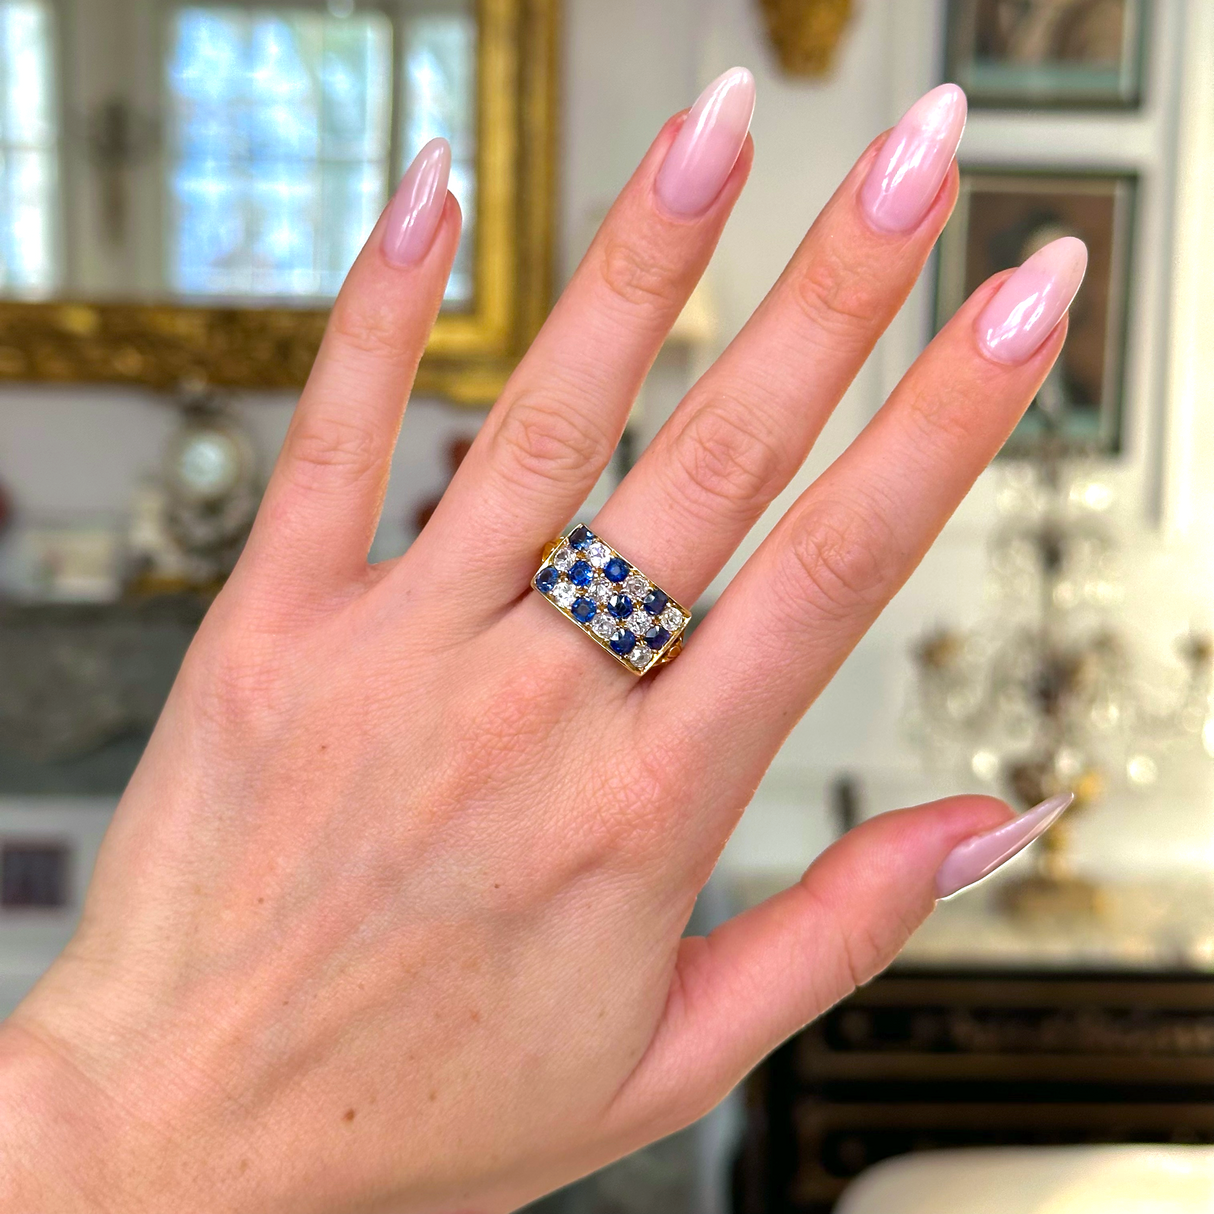 Sapphire and diamond checkerboard ring worn on hand.